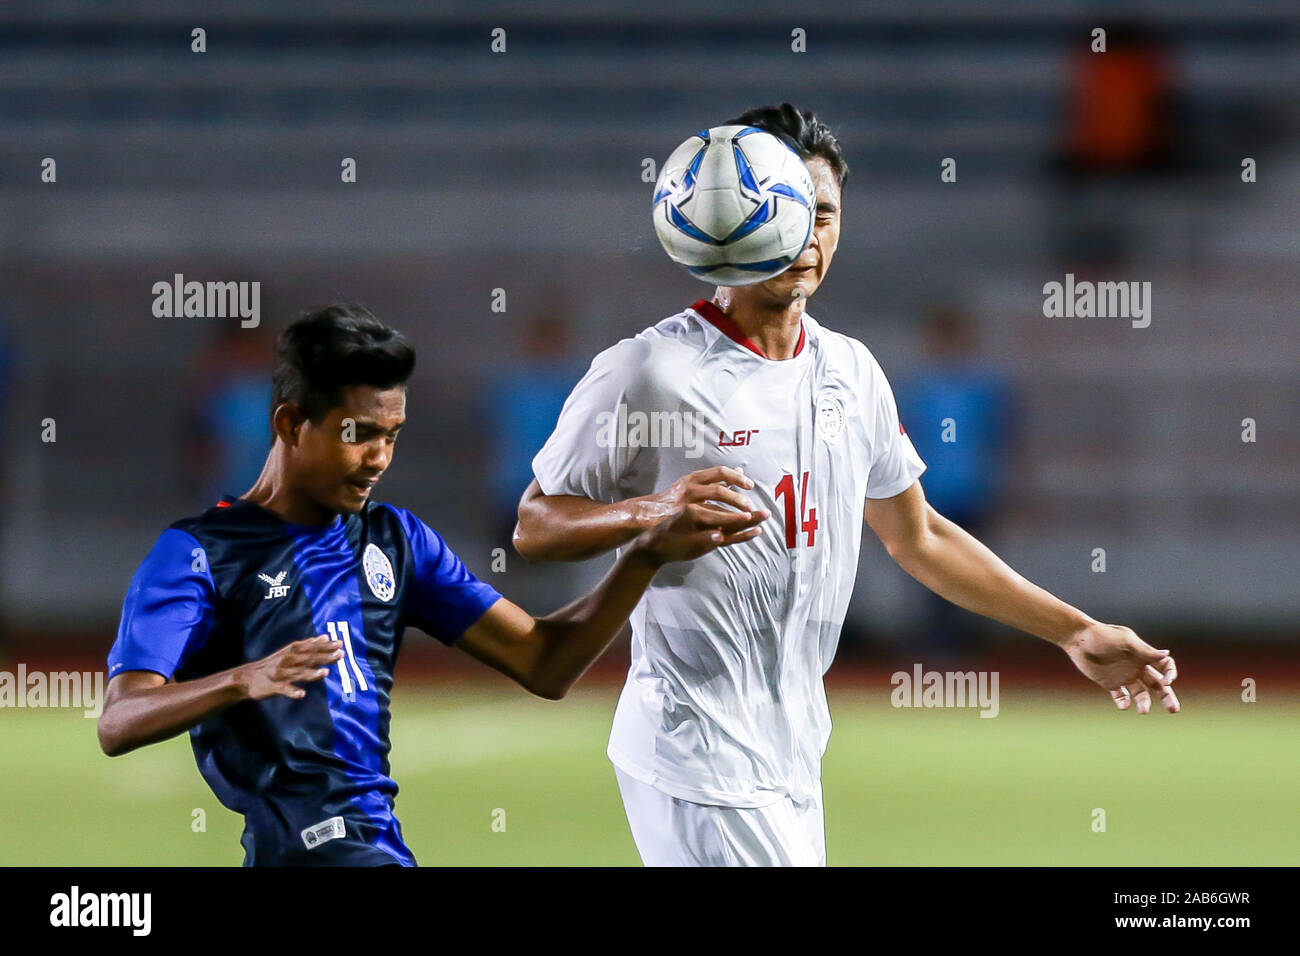 Manila, Philippines. 25th Nov, 2019. Javier Augustine Gayoso (R) of the Philippines competes with Sin Kakada of Cambodia during the men's first round football match at the SEA Games 2019 in Manila, the Philippines, Nov. 25, 2019. Credit: Rouelle Umali/Xinhua/Alamy Live News Stock Photo